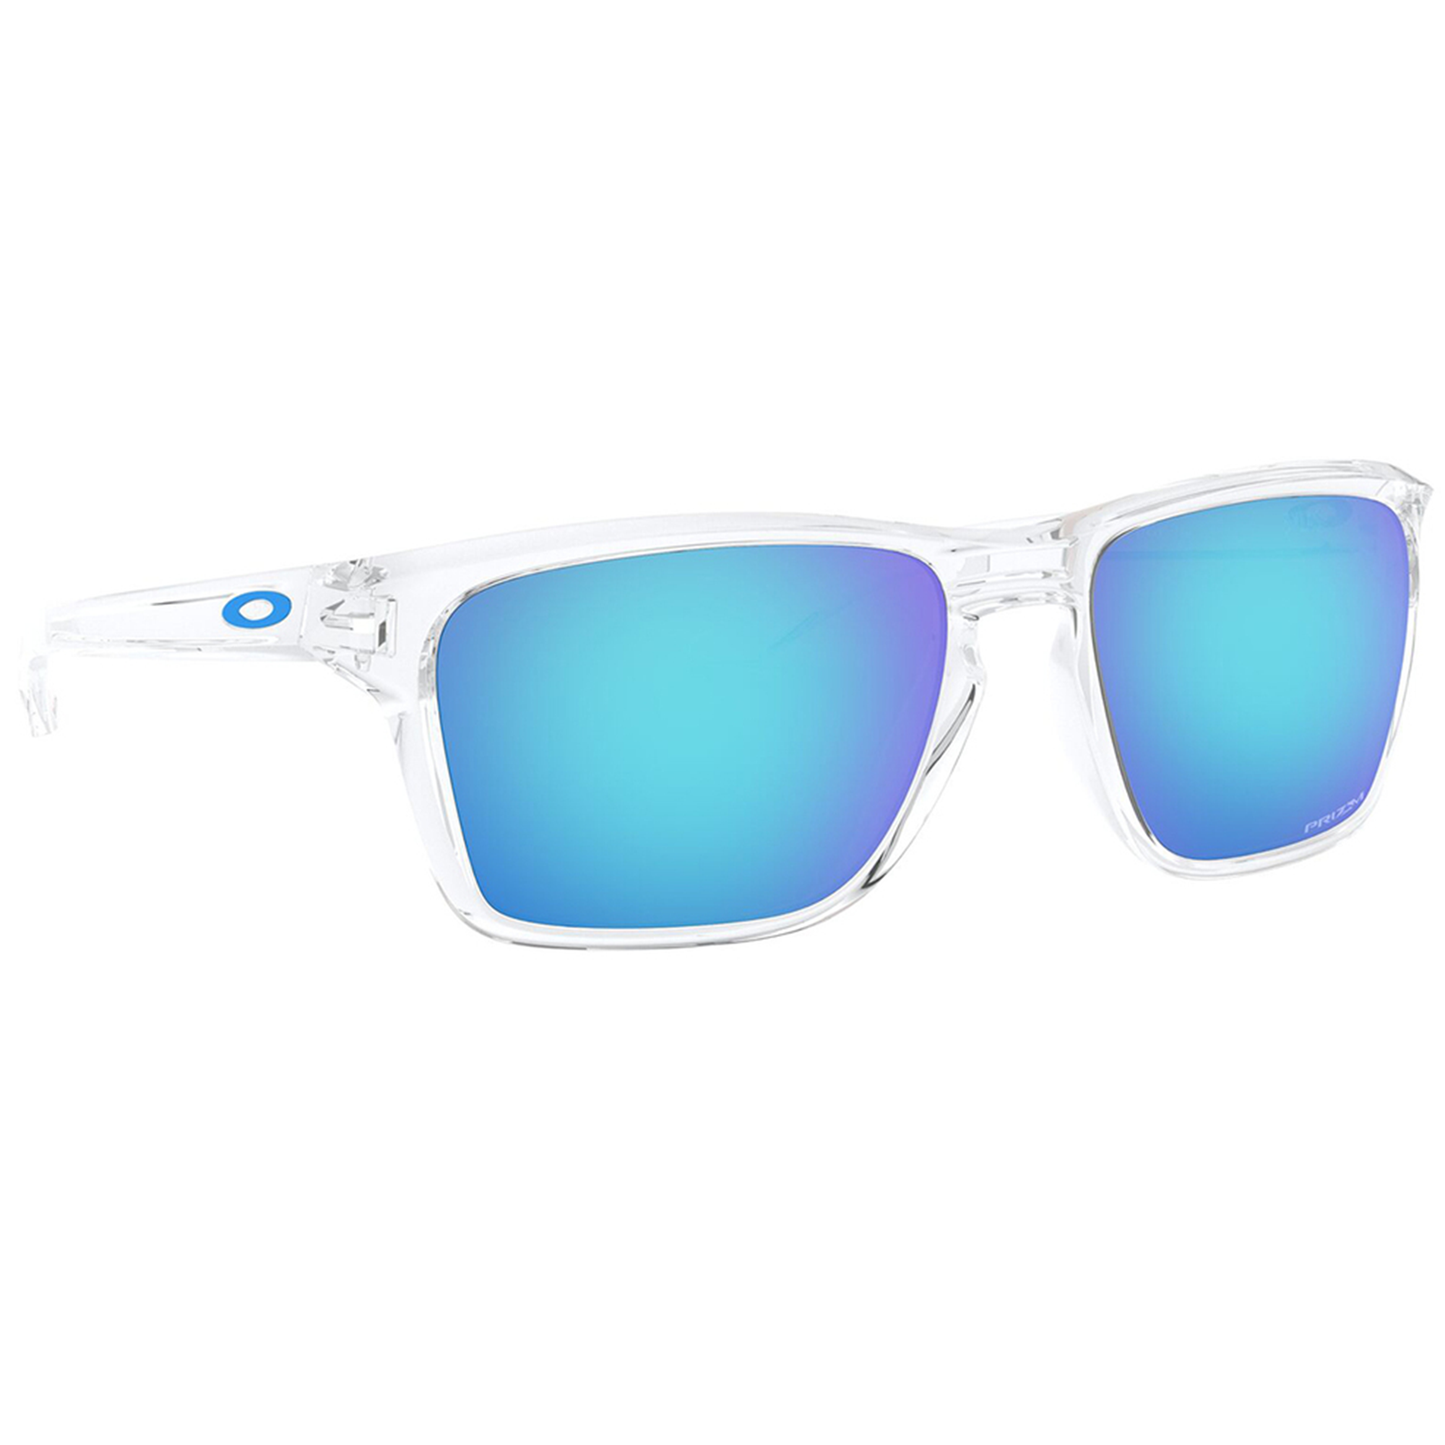 Oakley Sylas Sunglasses (Polished Clear) Prizm Sapphire Lens - Free Case